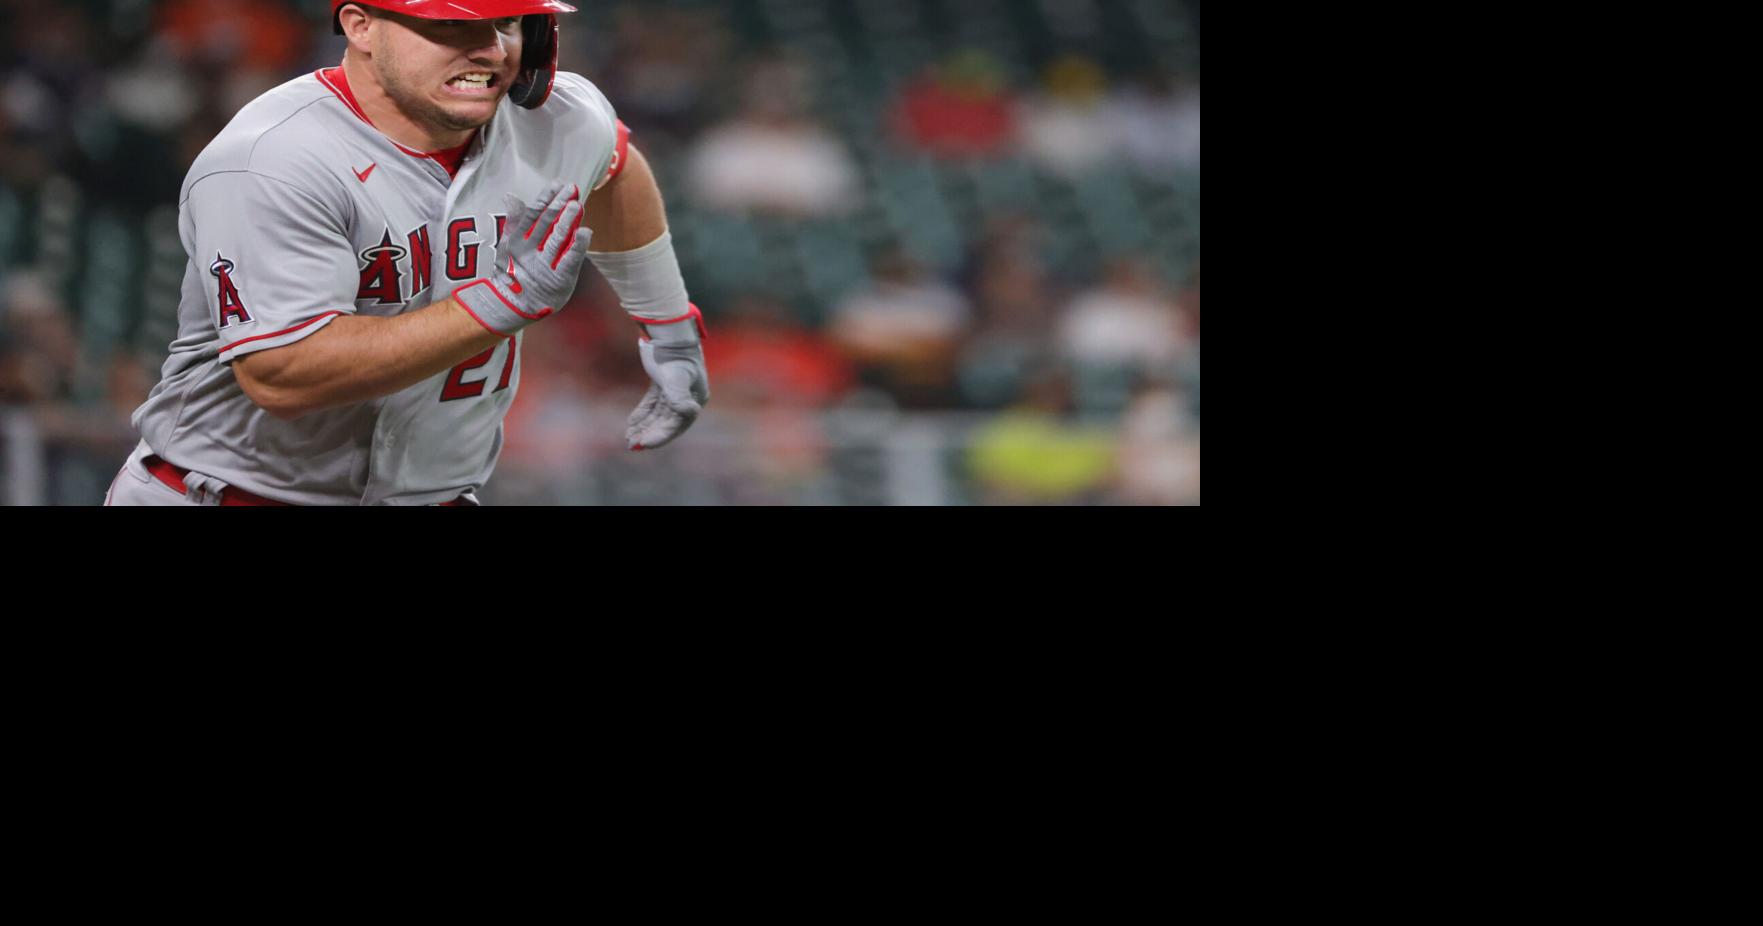 Mike Trout is first player to reach 10 WAR since Barry Bonds - NBC Sports